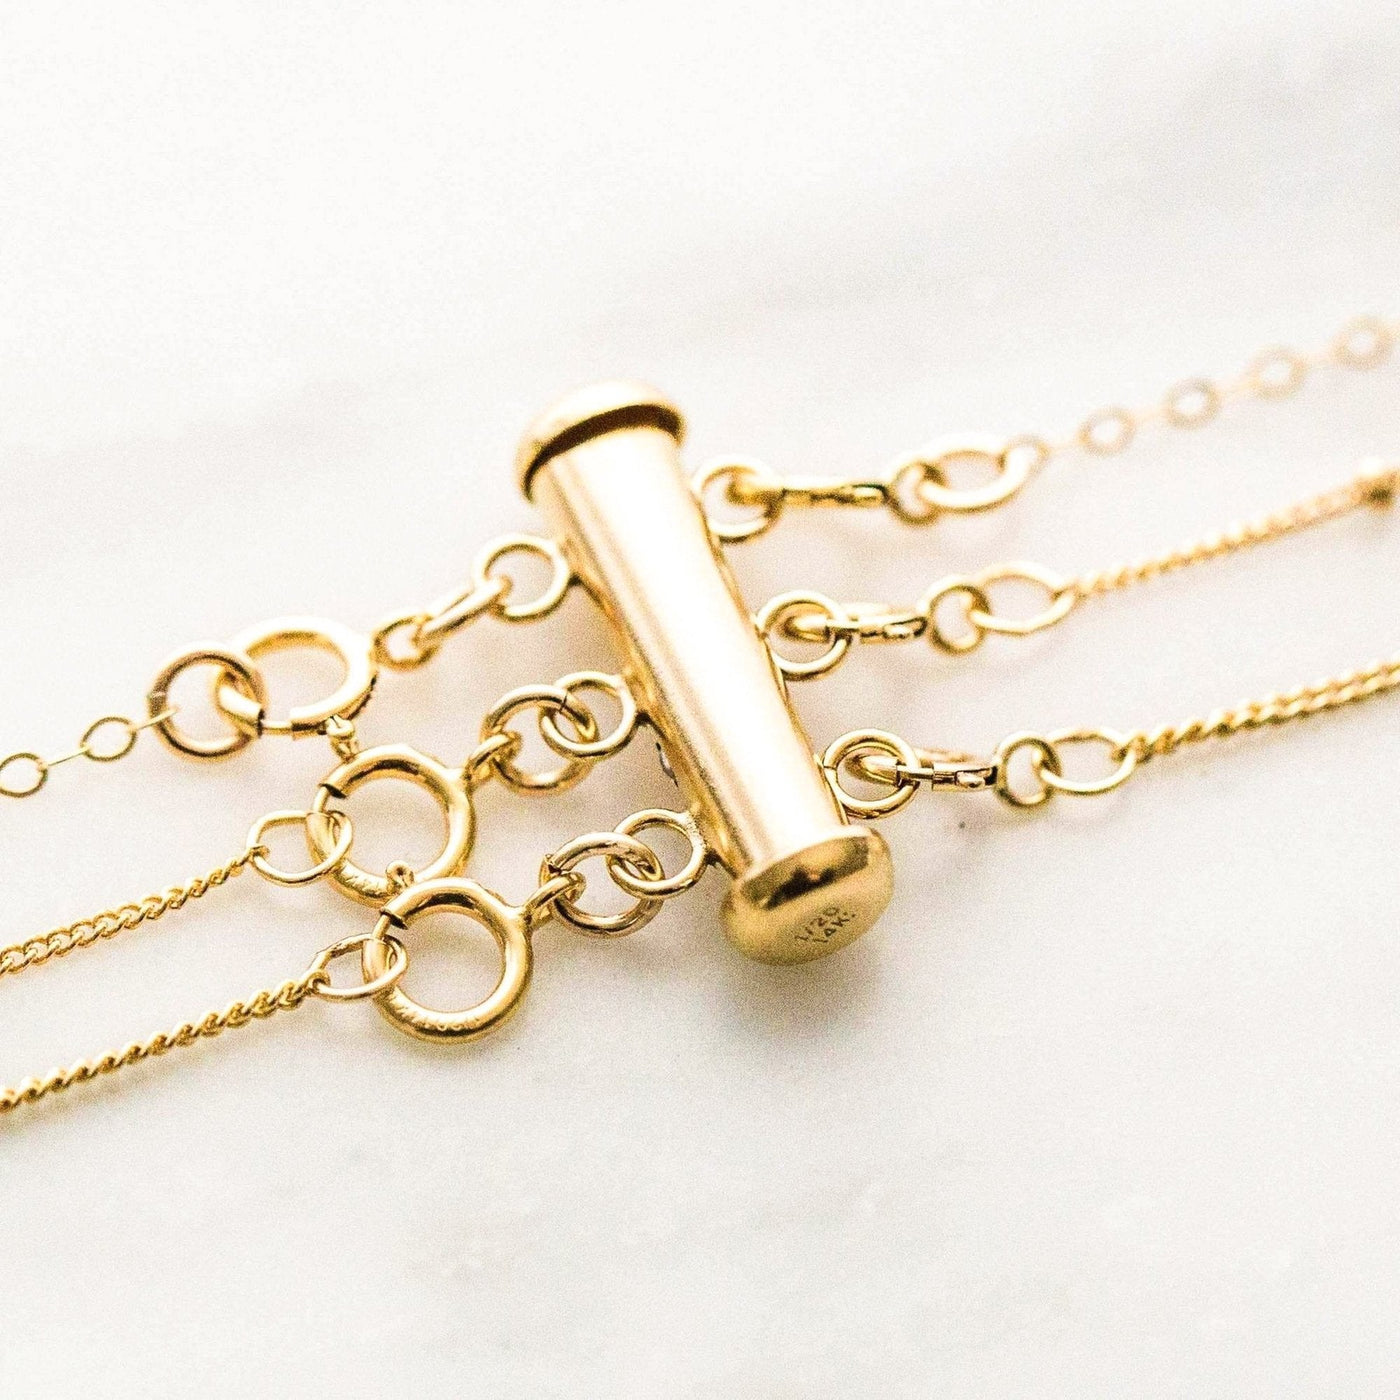 2 Clasps 3 Clasps Layered Necklace Detangler by Simple & Dainty Jewelry